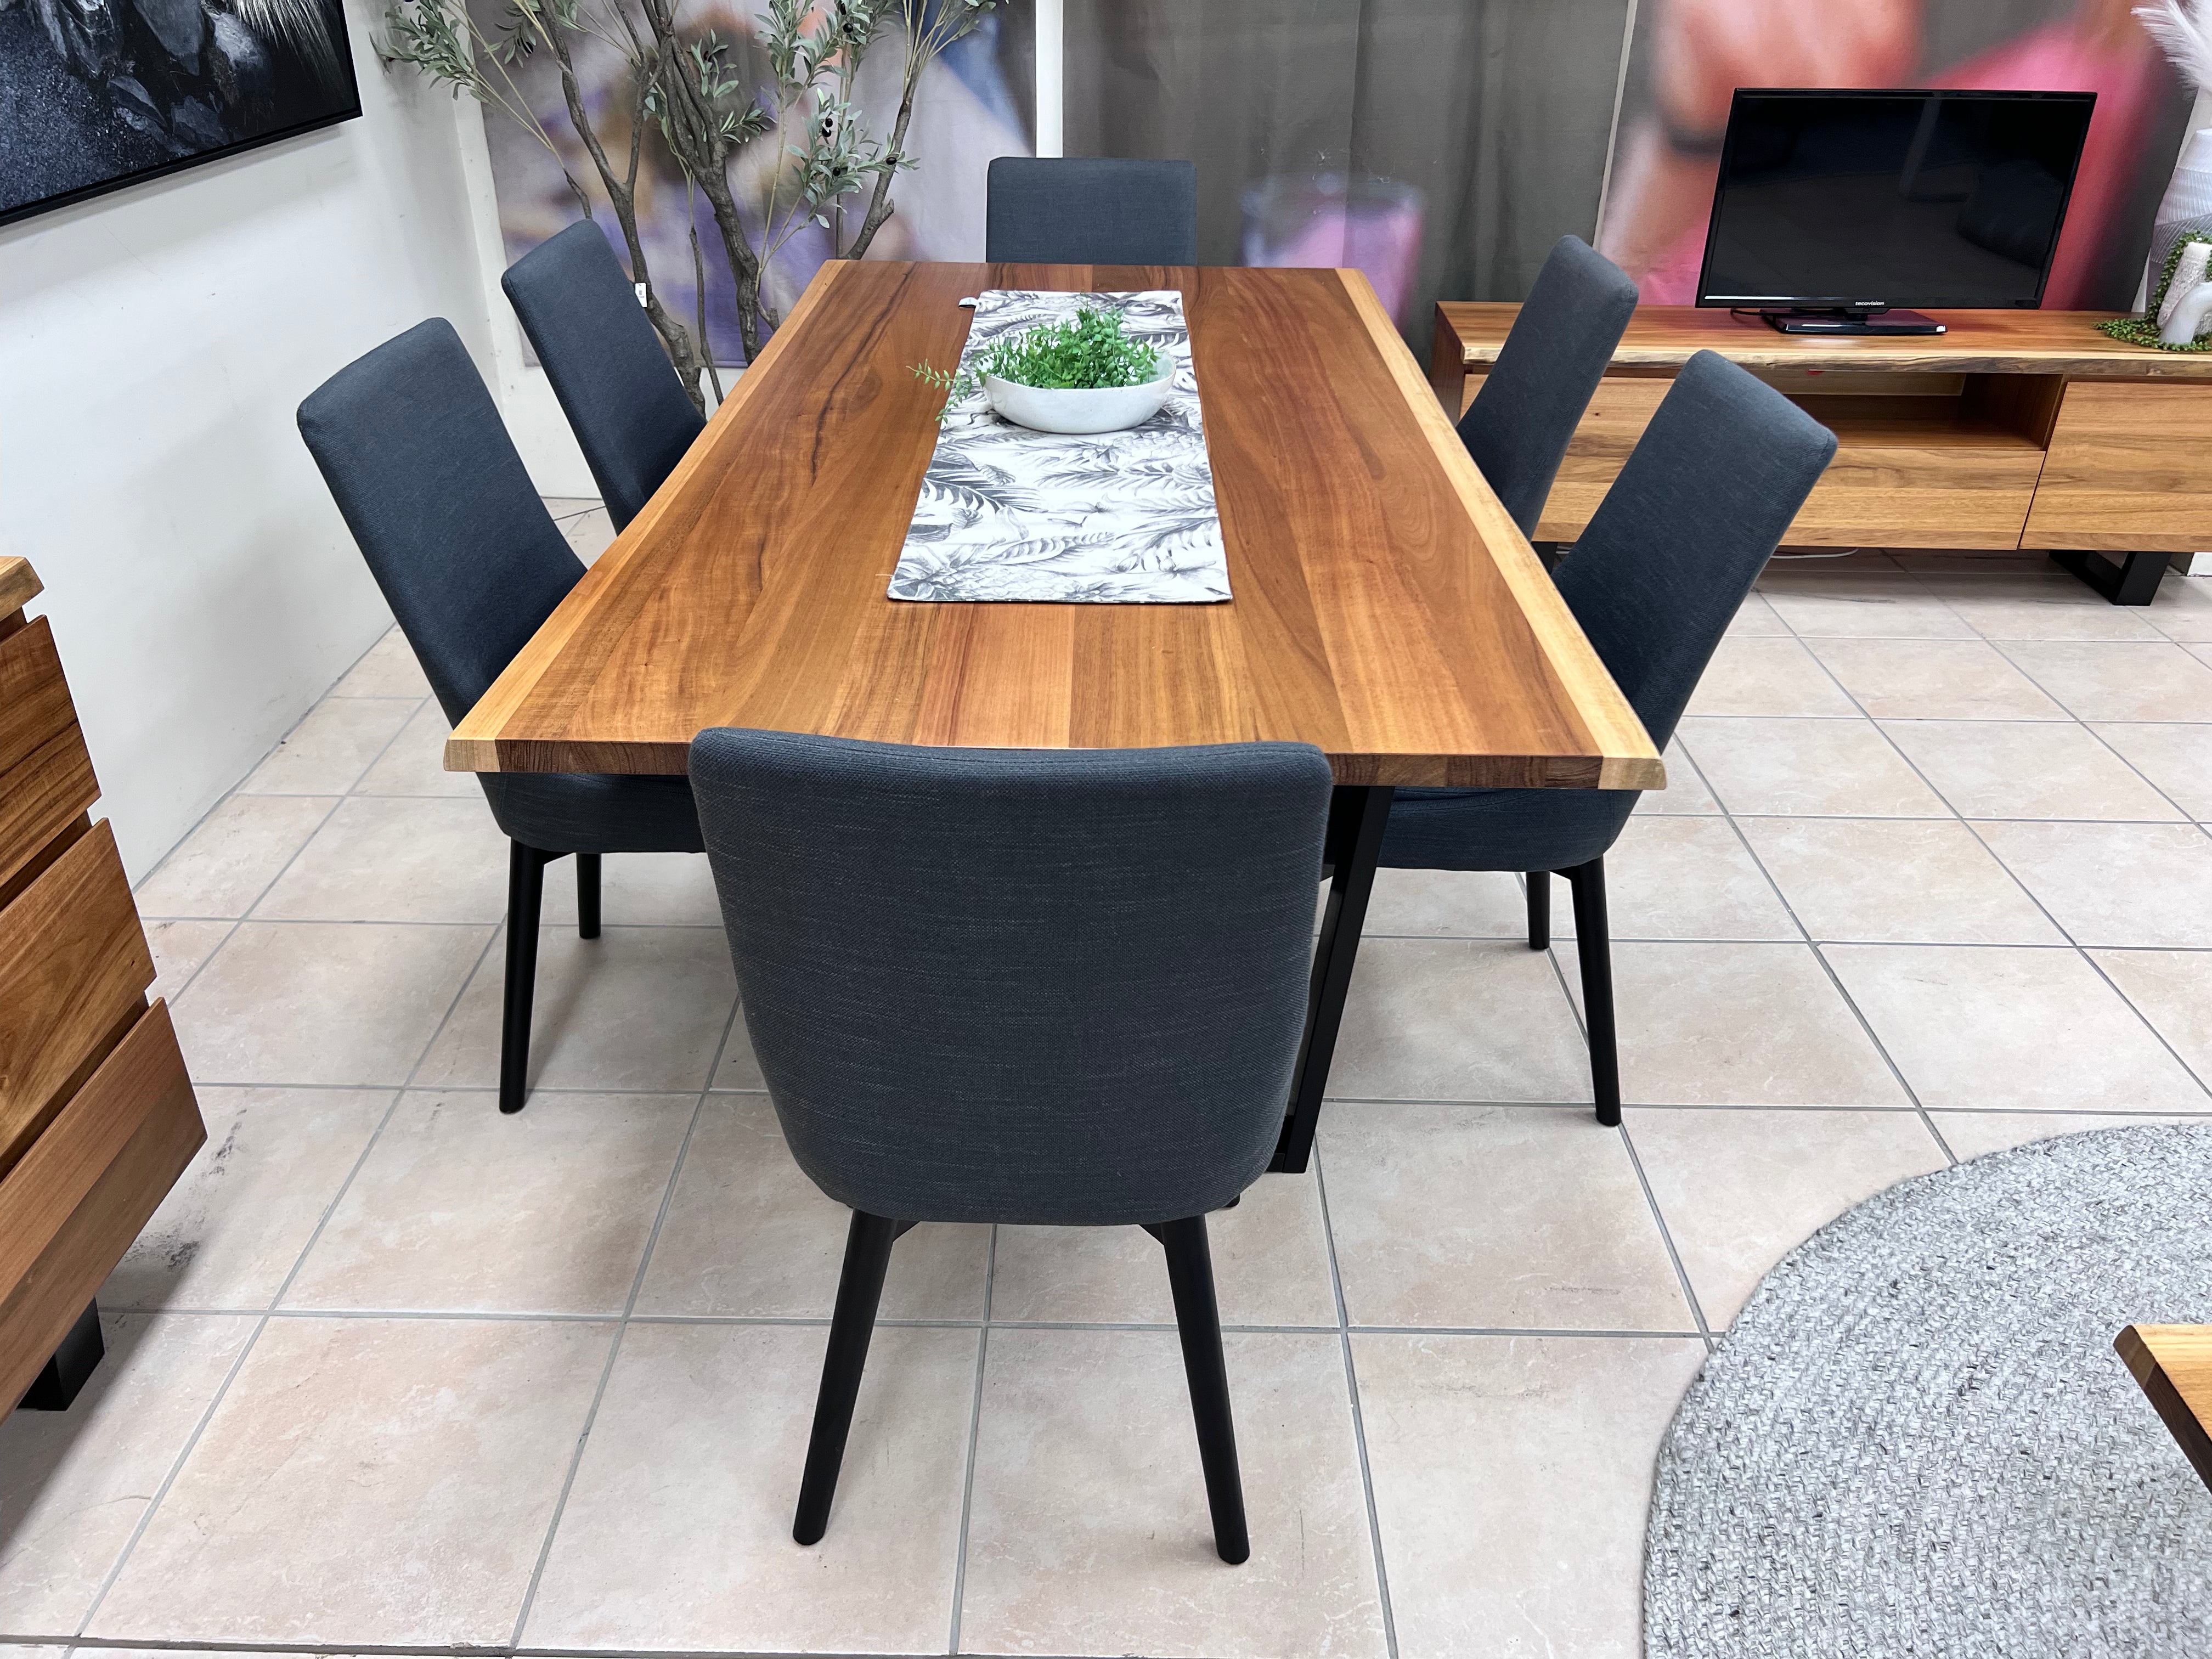 Midlands 7 Piece Package 190cm Table